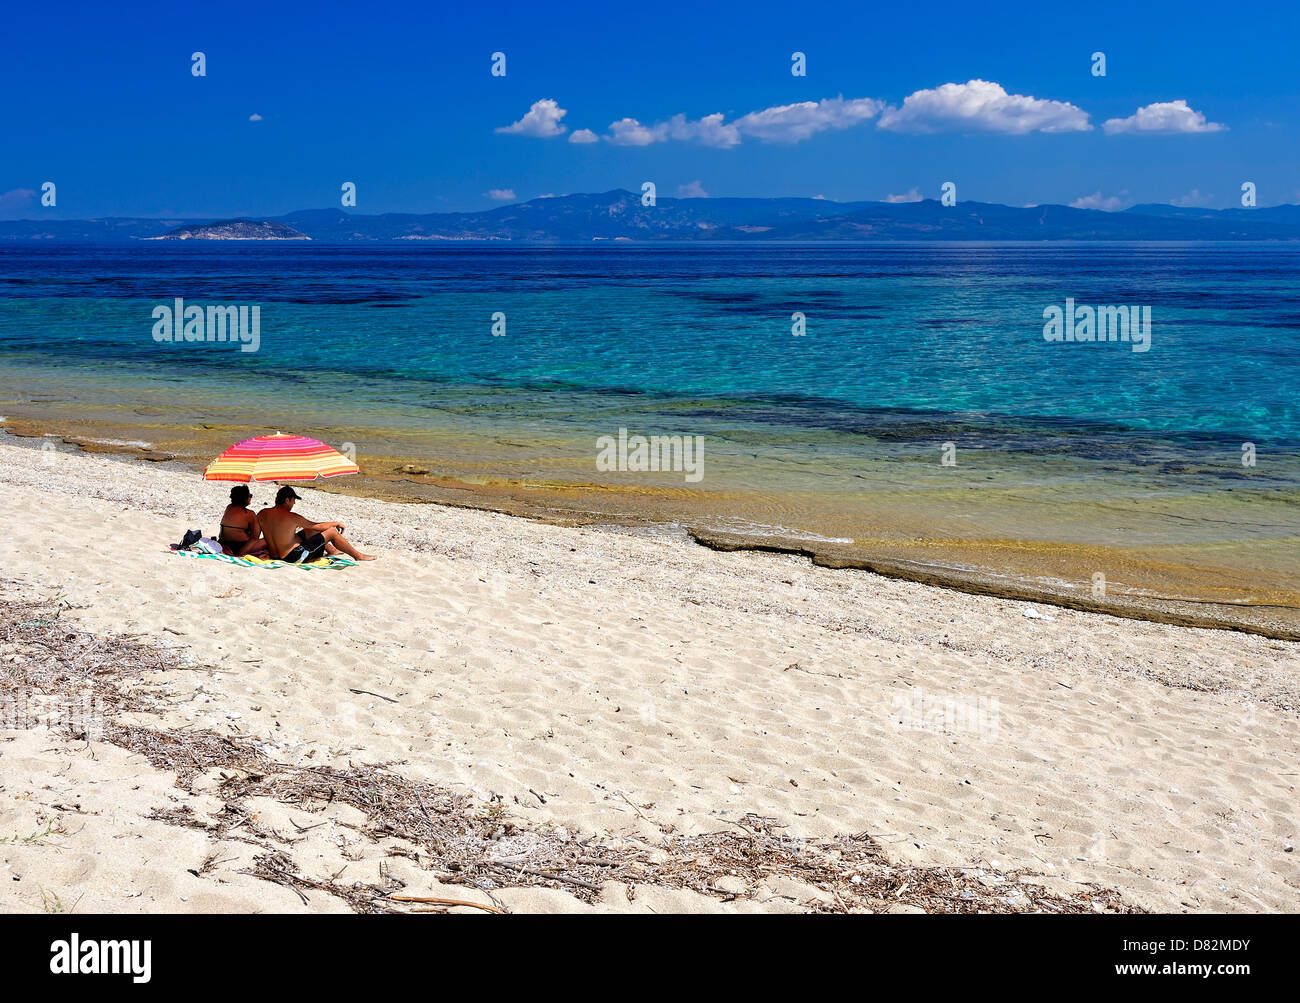 Two people on the beach with umbrela Stock Photo